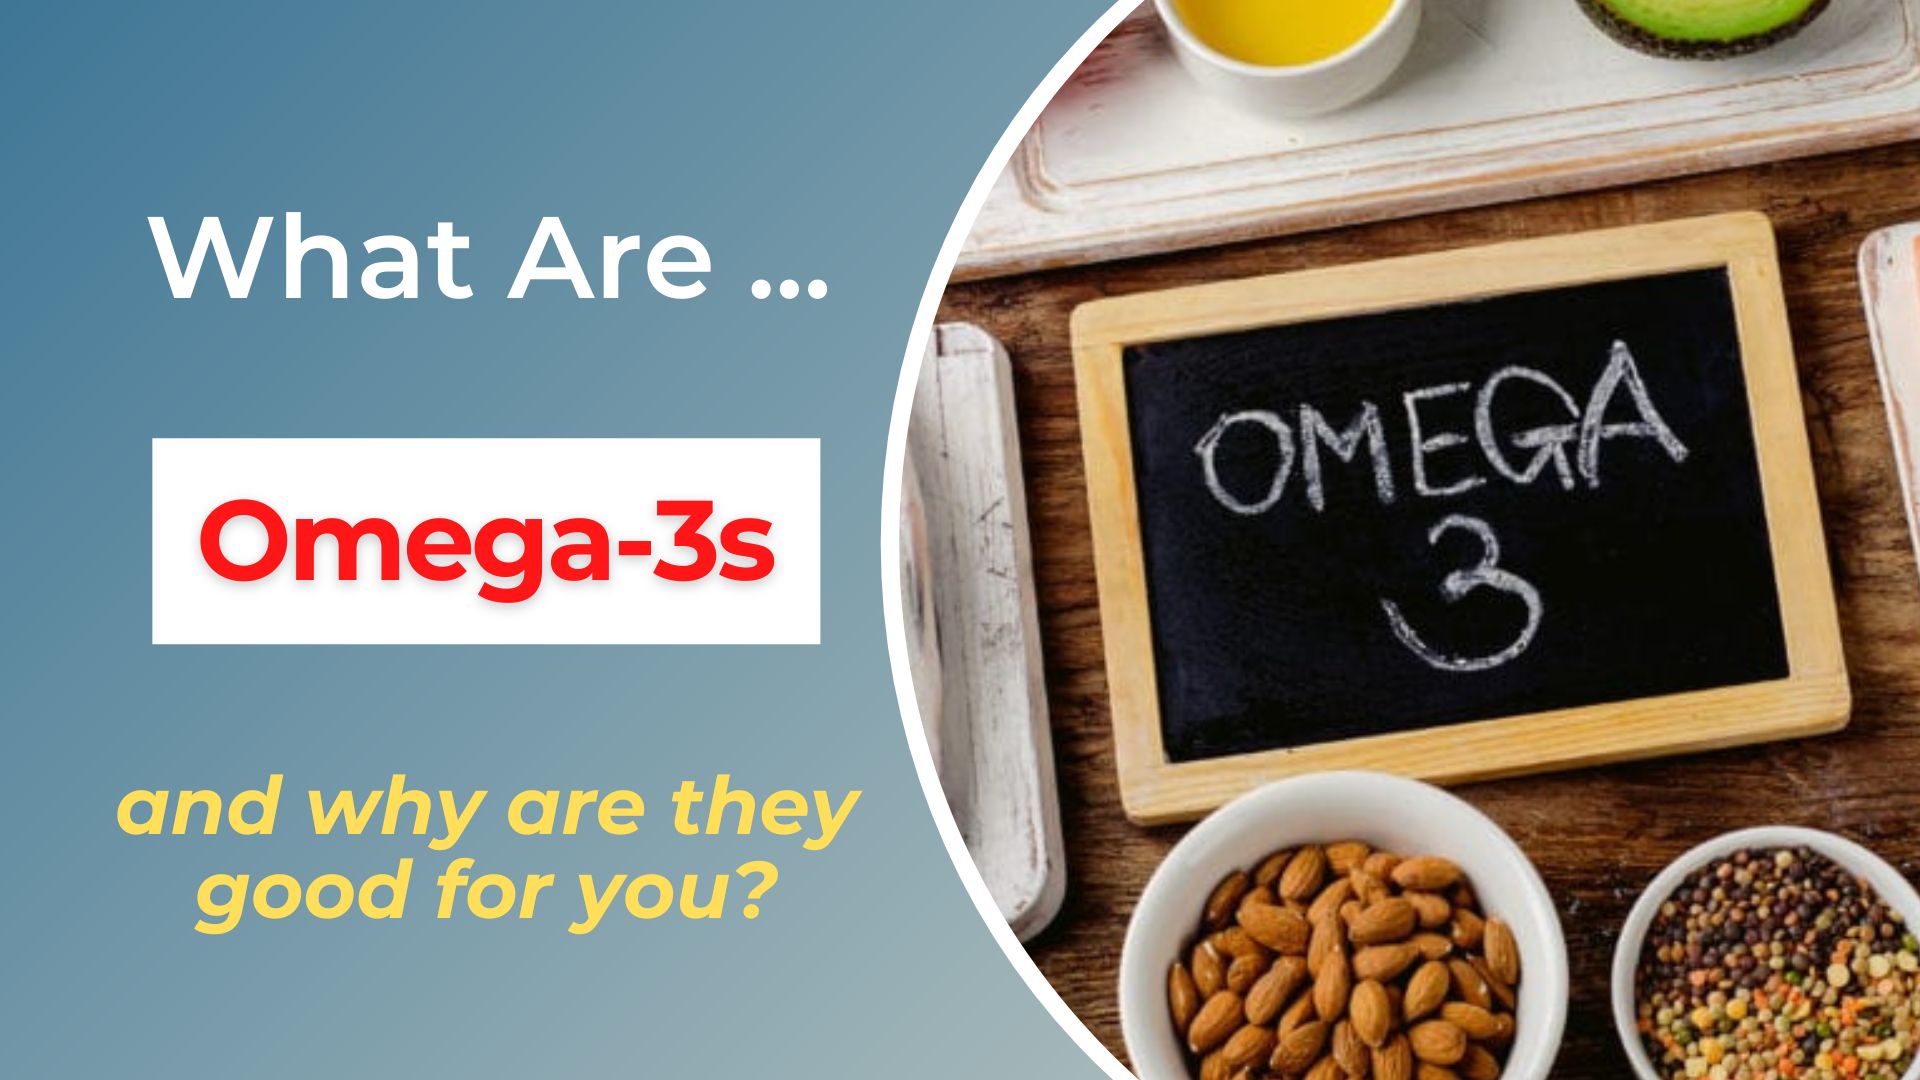 What Are Omega-3s